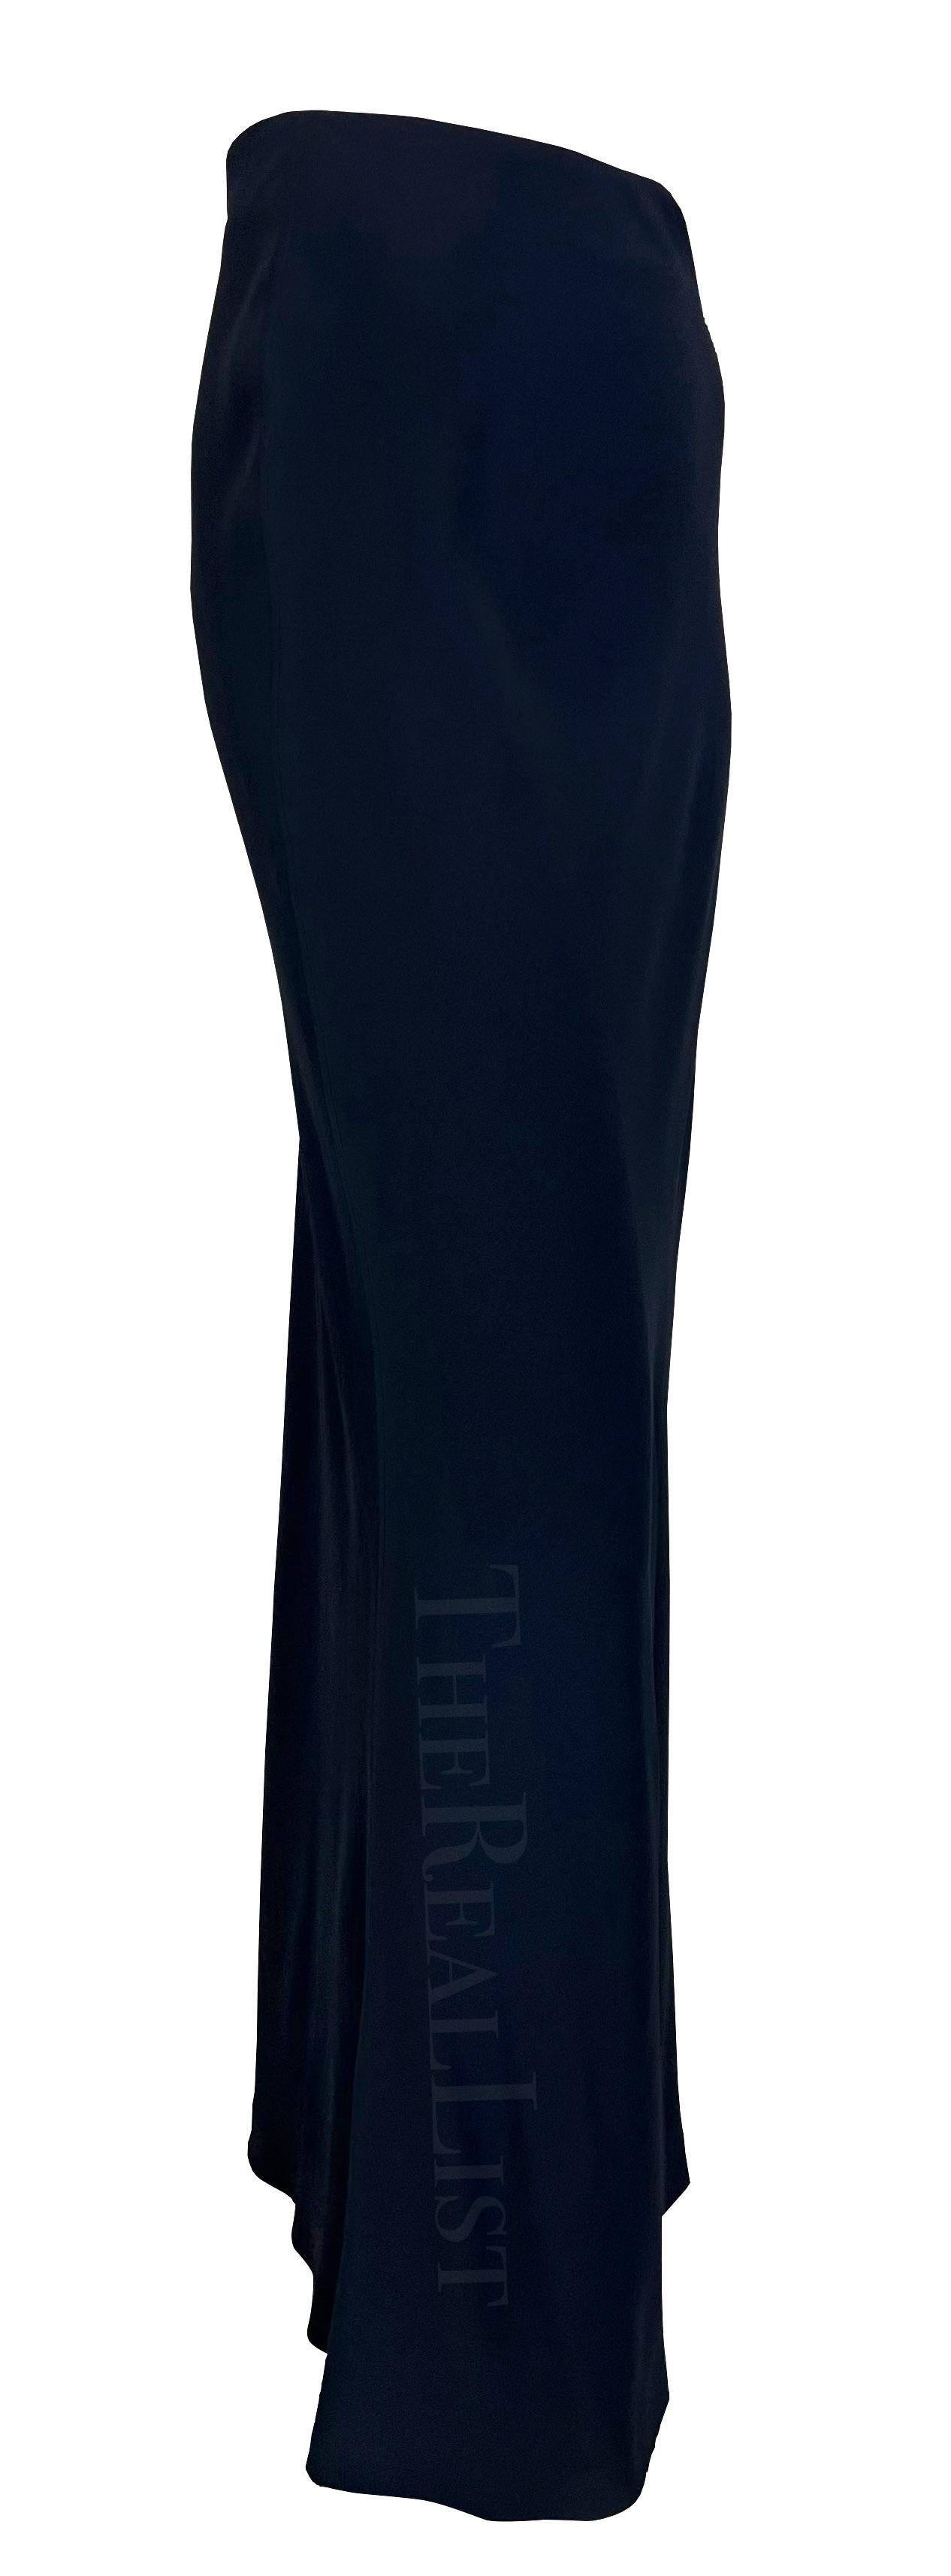 NWT S/S 1996 Gucci by Tom Ford Navy Bodycon Stretch Maxi Skirt For Sale 3